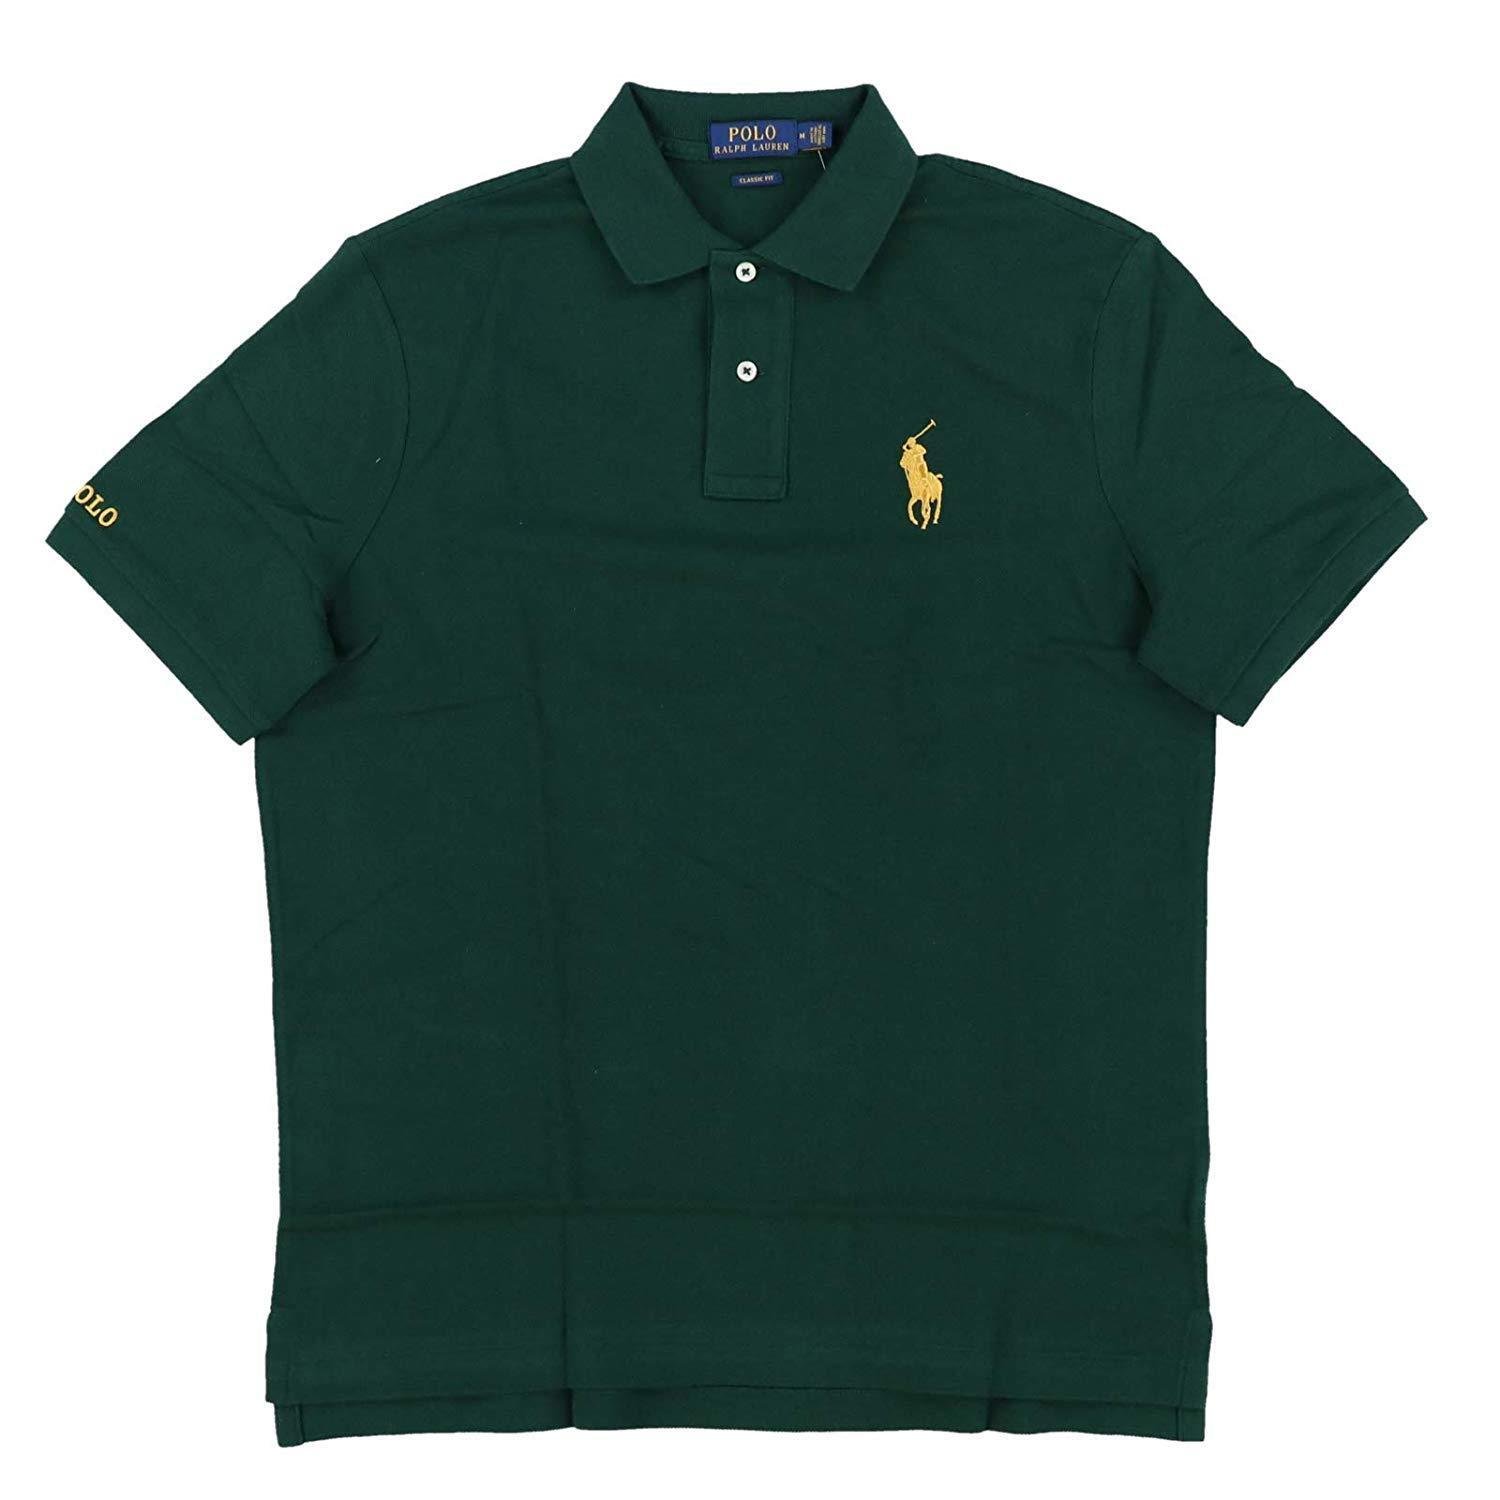 Polo Ralph Lauren Mens Classic Fit Mesh Green with Gold Pony Polo Shirt S M